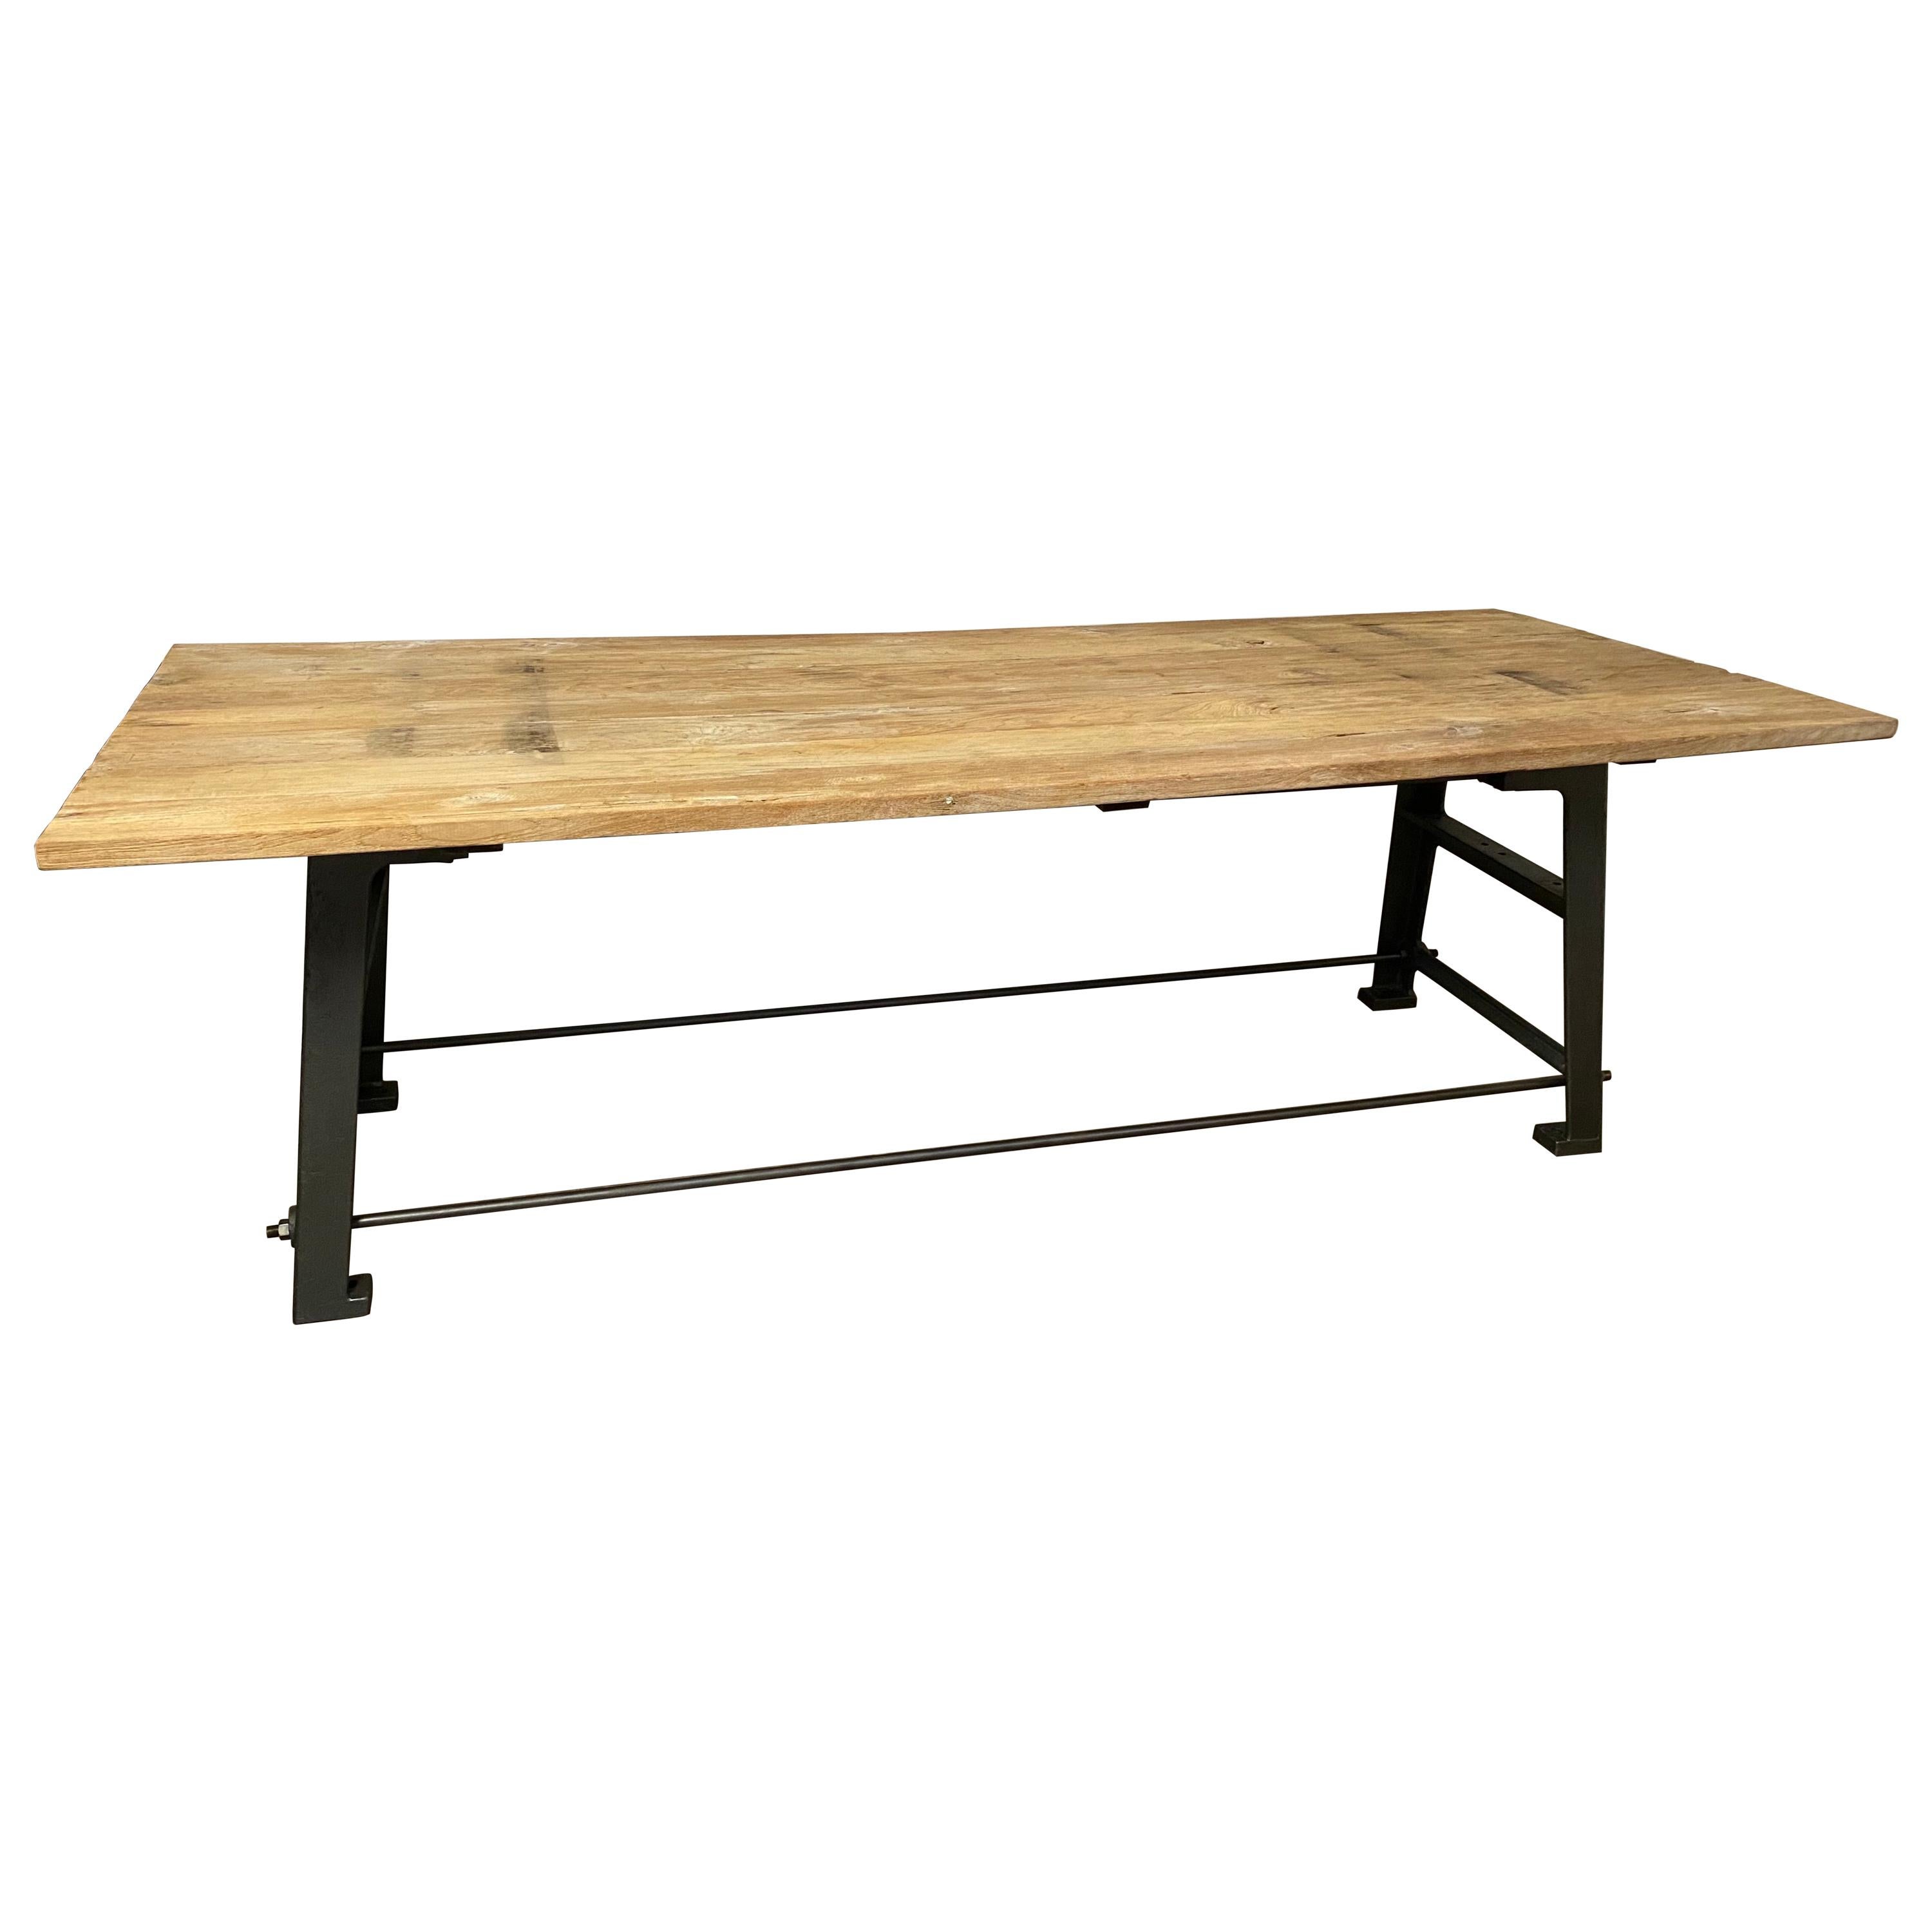 Large Industrial Worktable or Kitchen Island